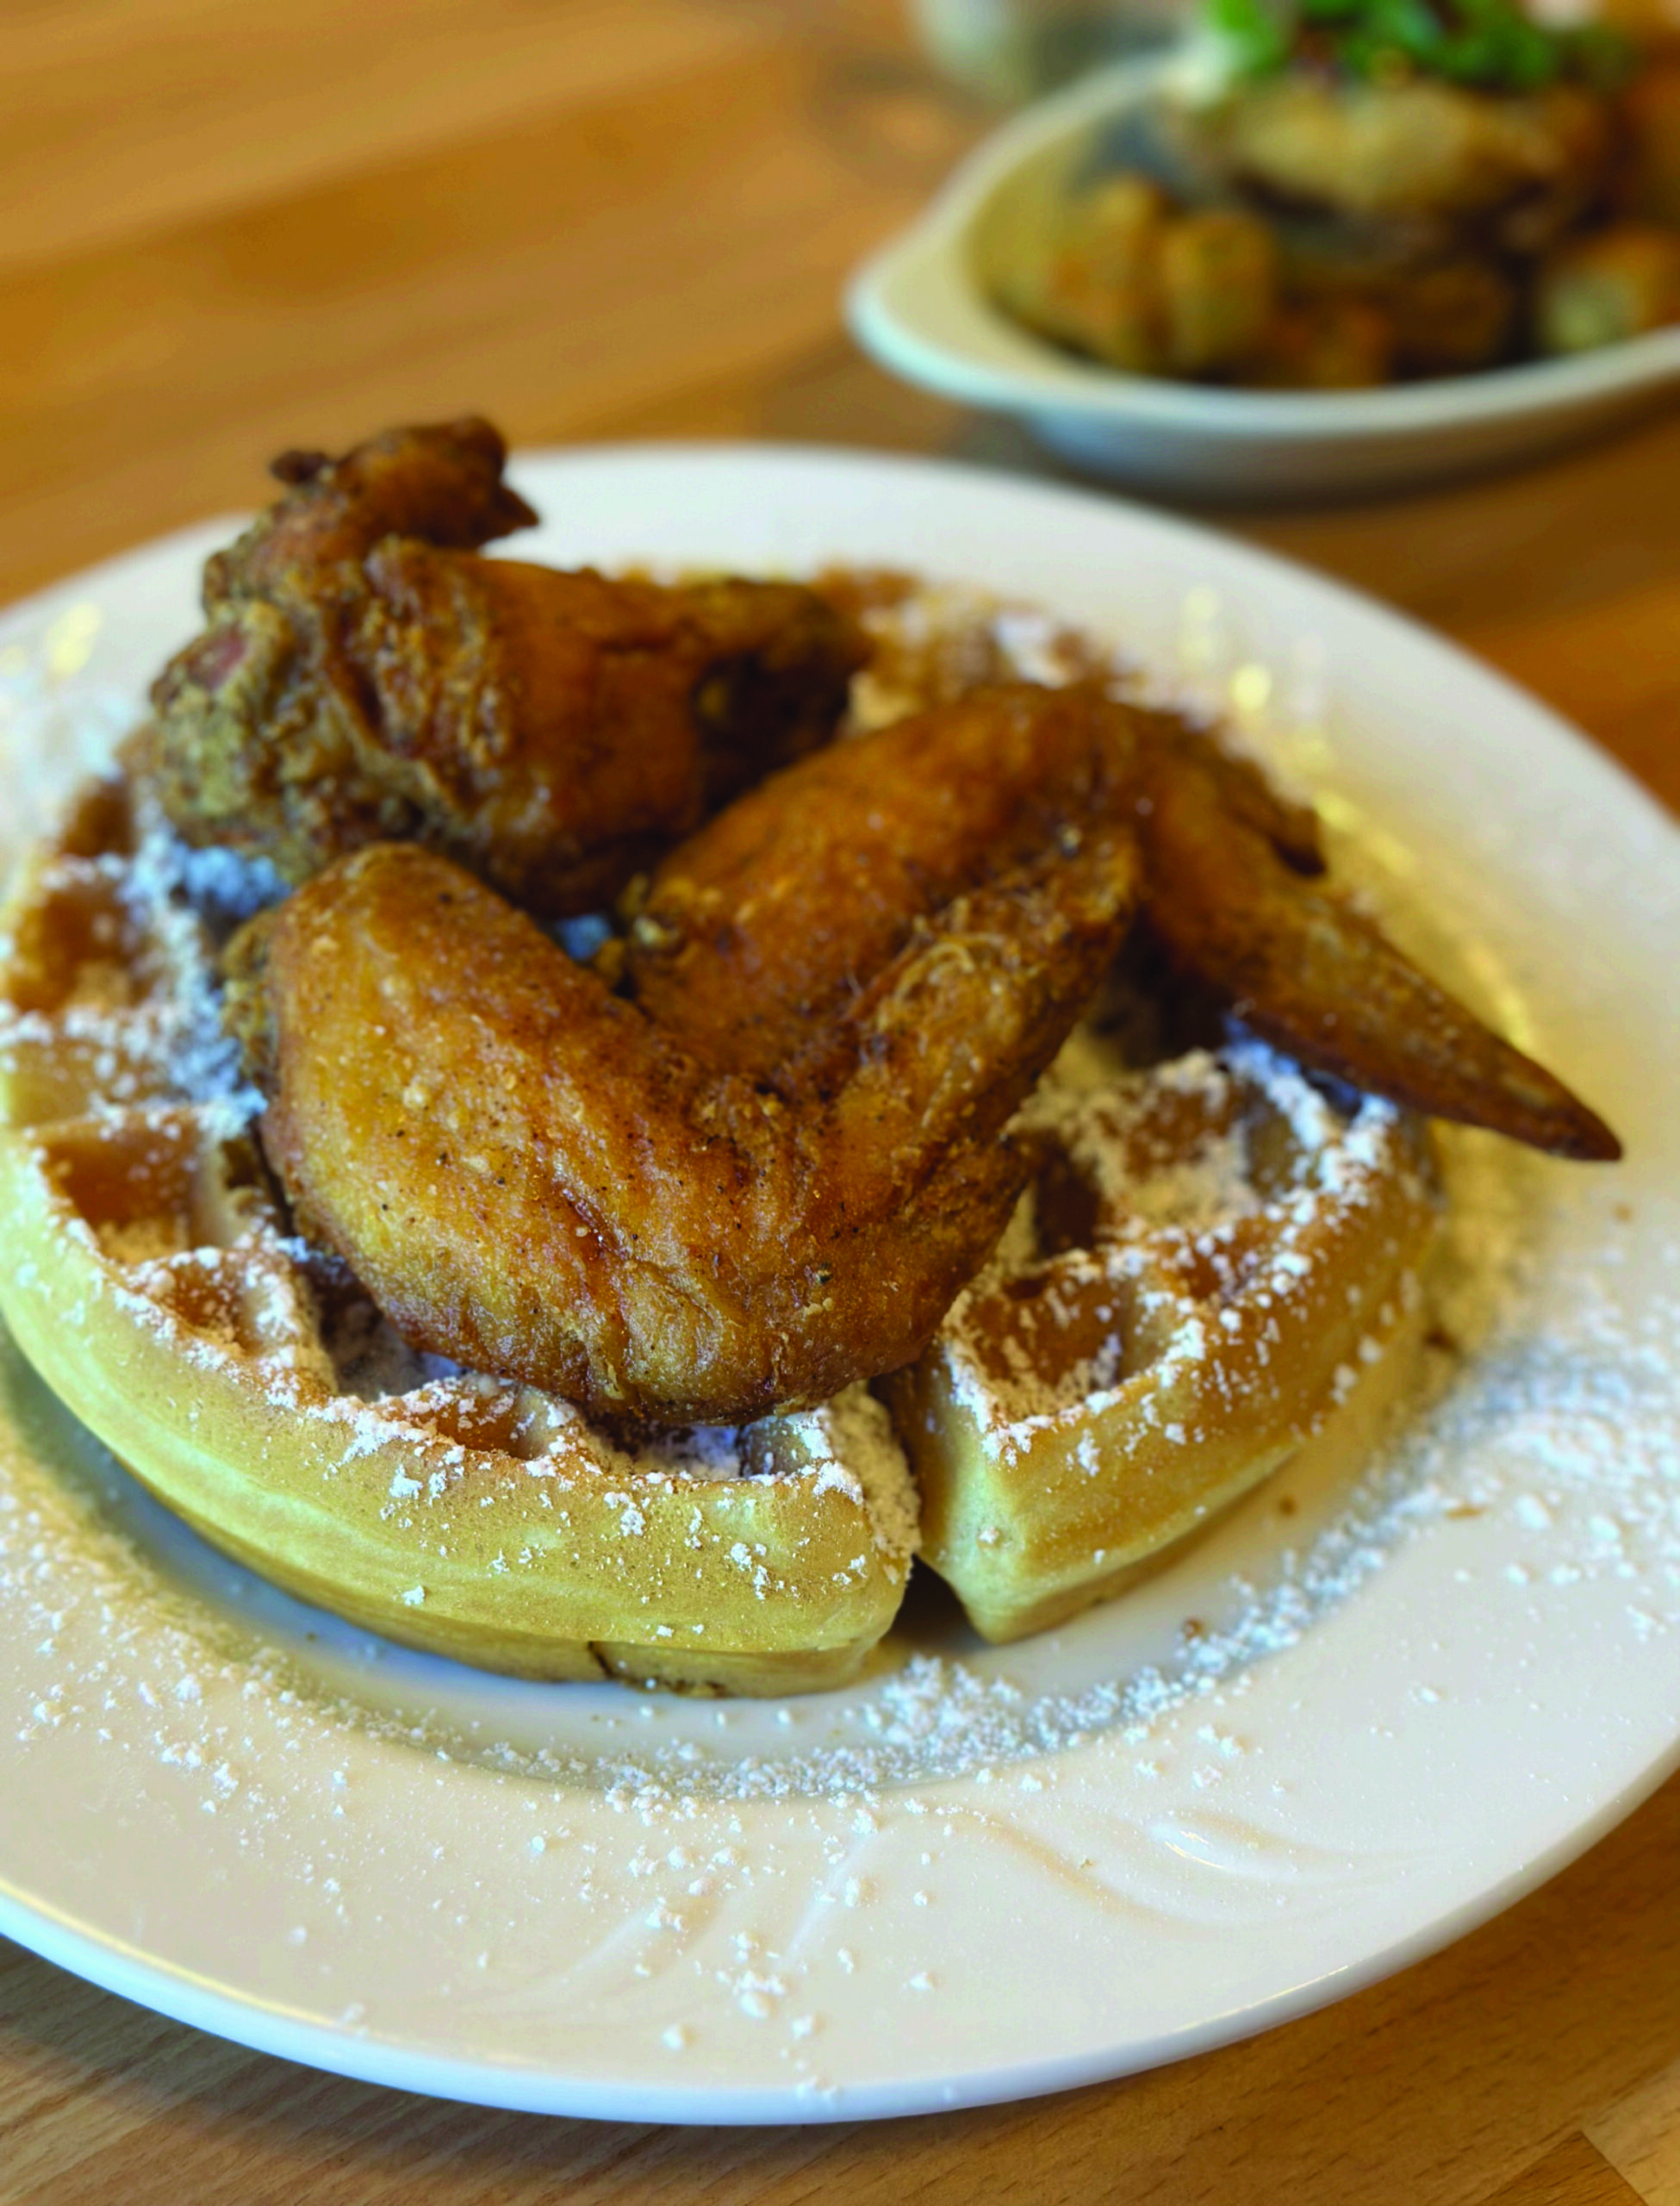 Chicken and Waffles are on the menu!